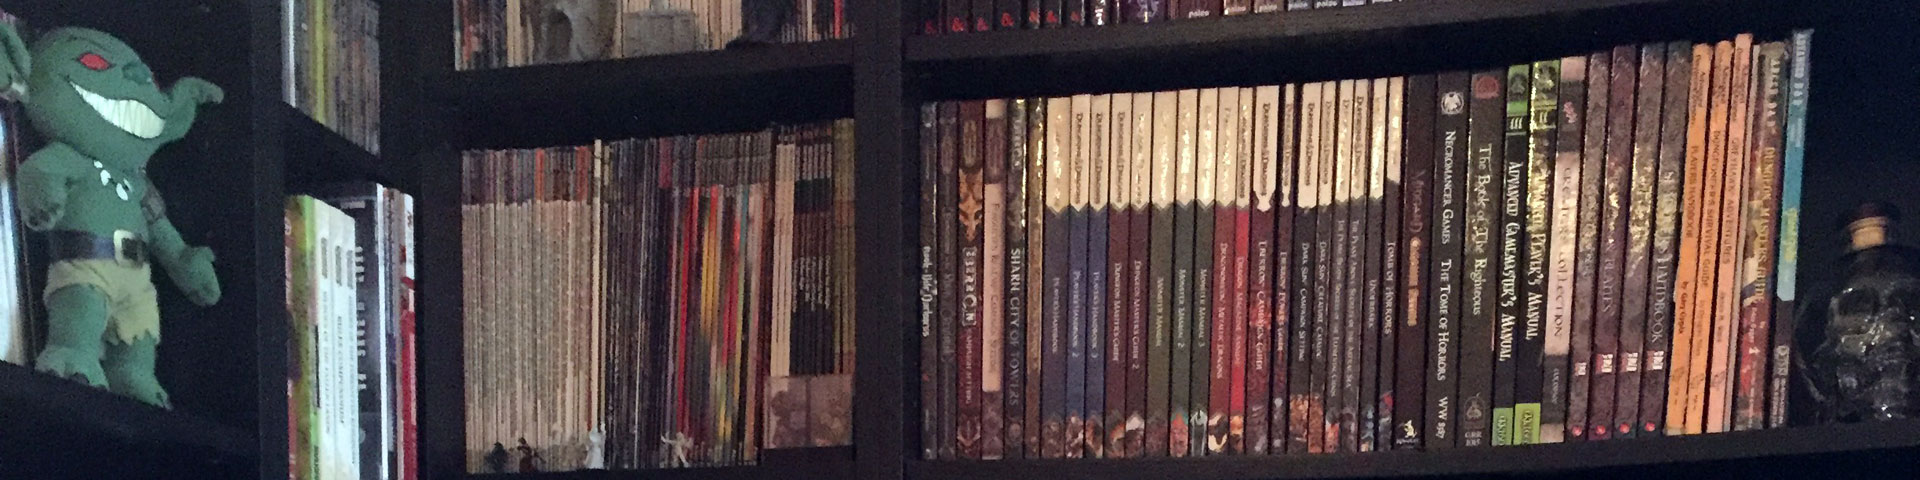 A variety of role-playing games (and one Pathfinder goblin) stand on a black bookshelf.